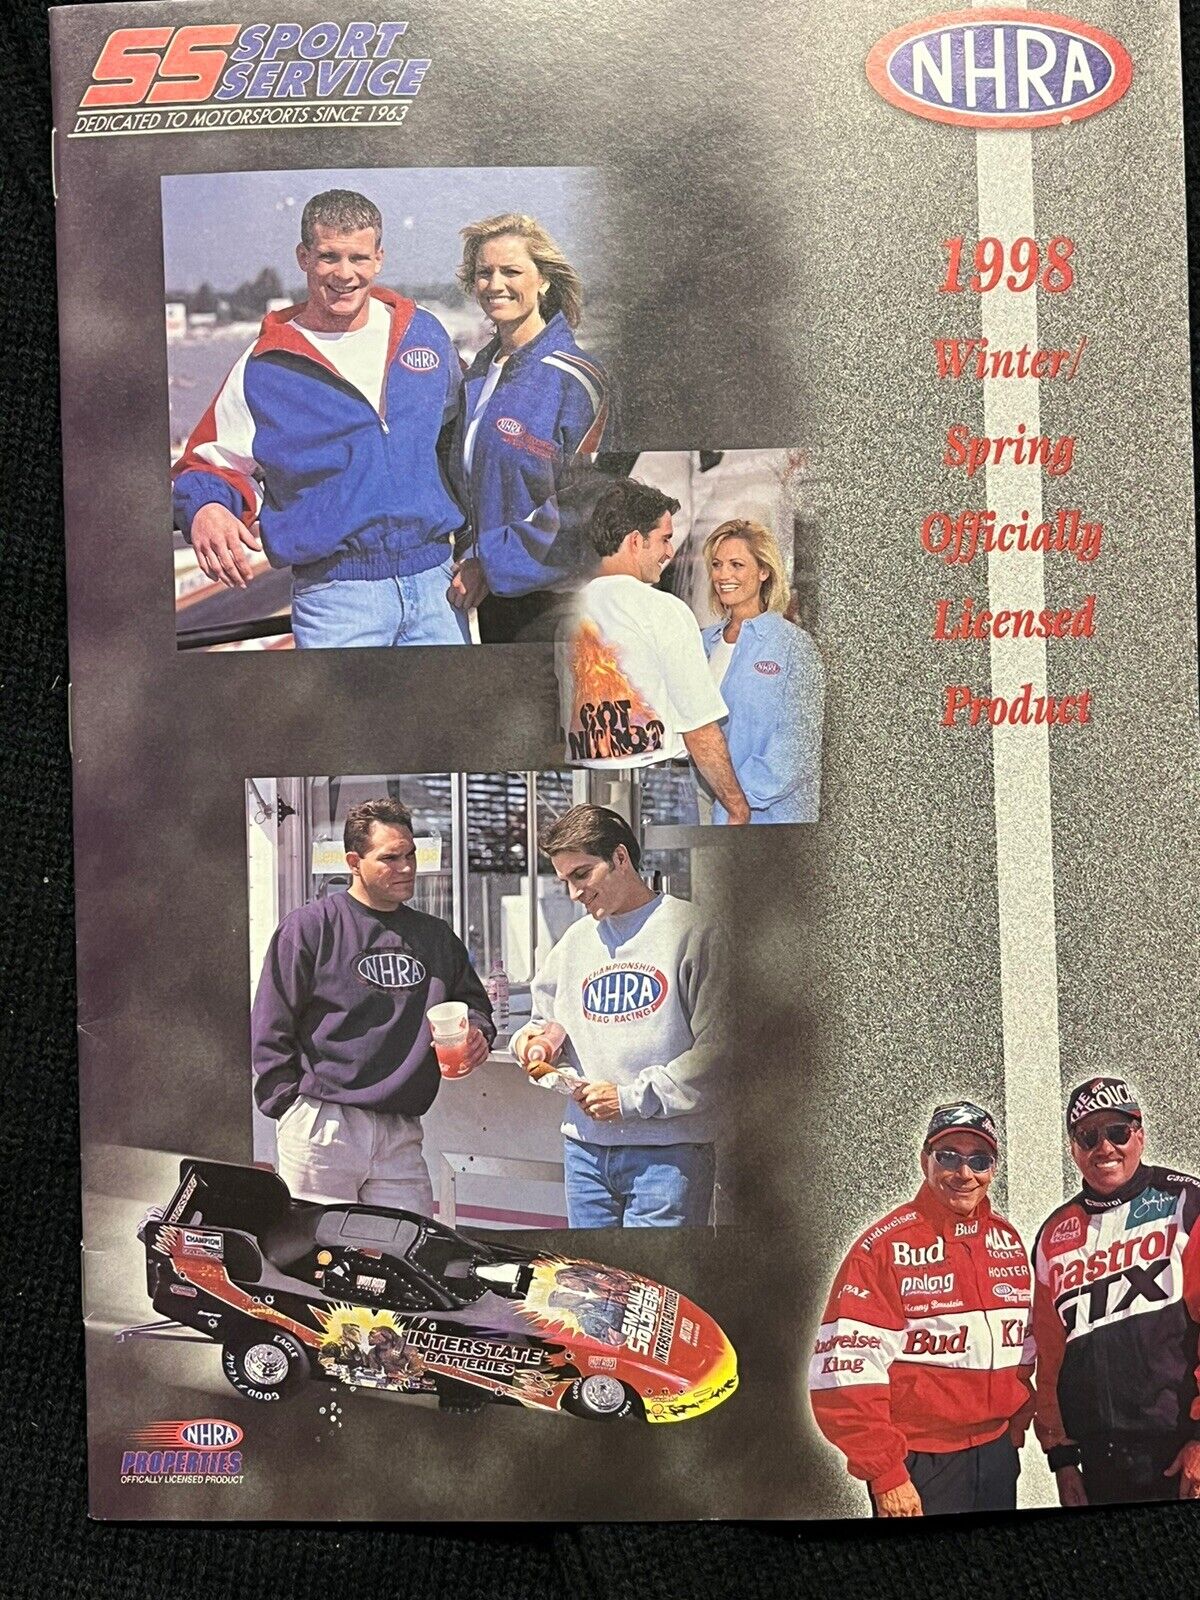 1998 NHRA PRODUCTS MagazineAutomotive DRAG RACING BERNSTEIN FORCE TOP FUEL